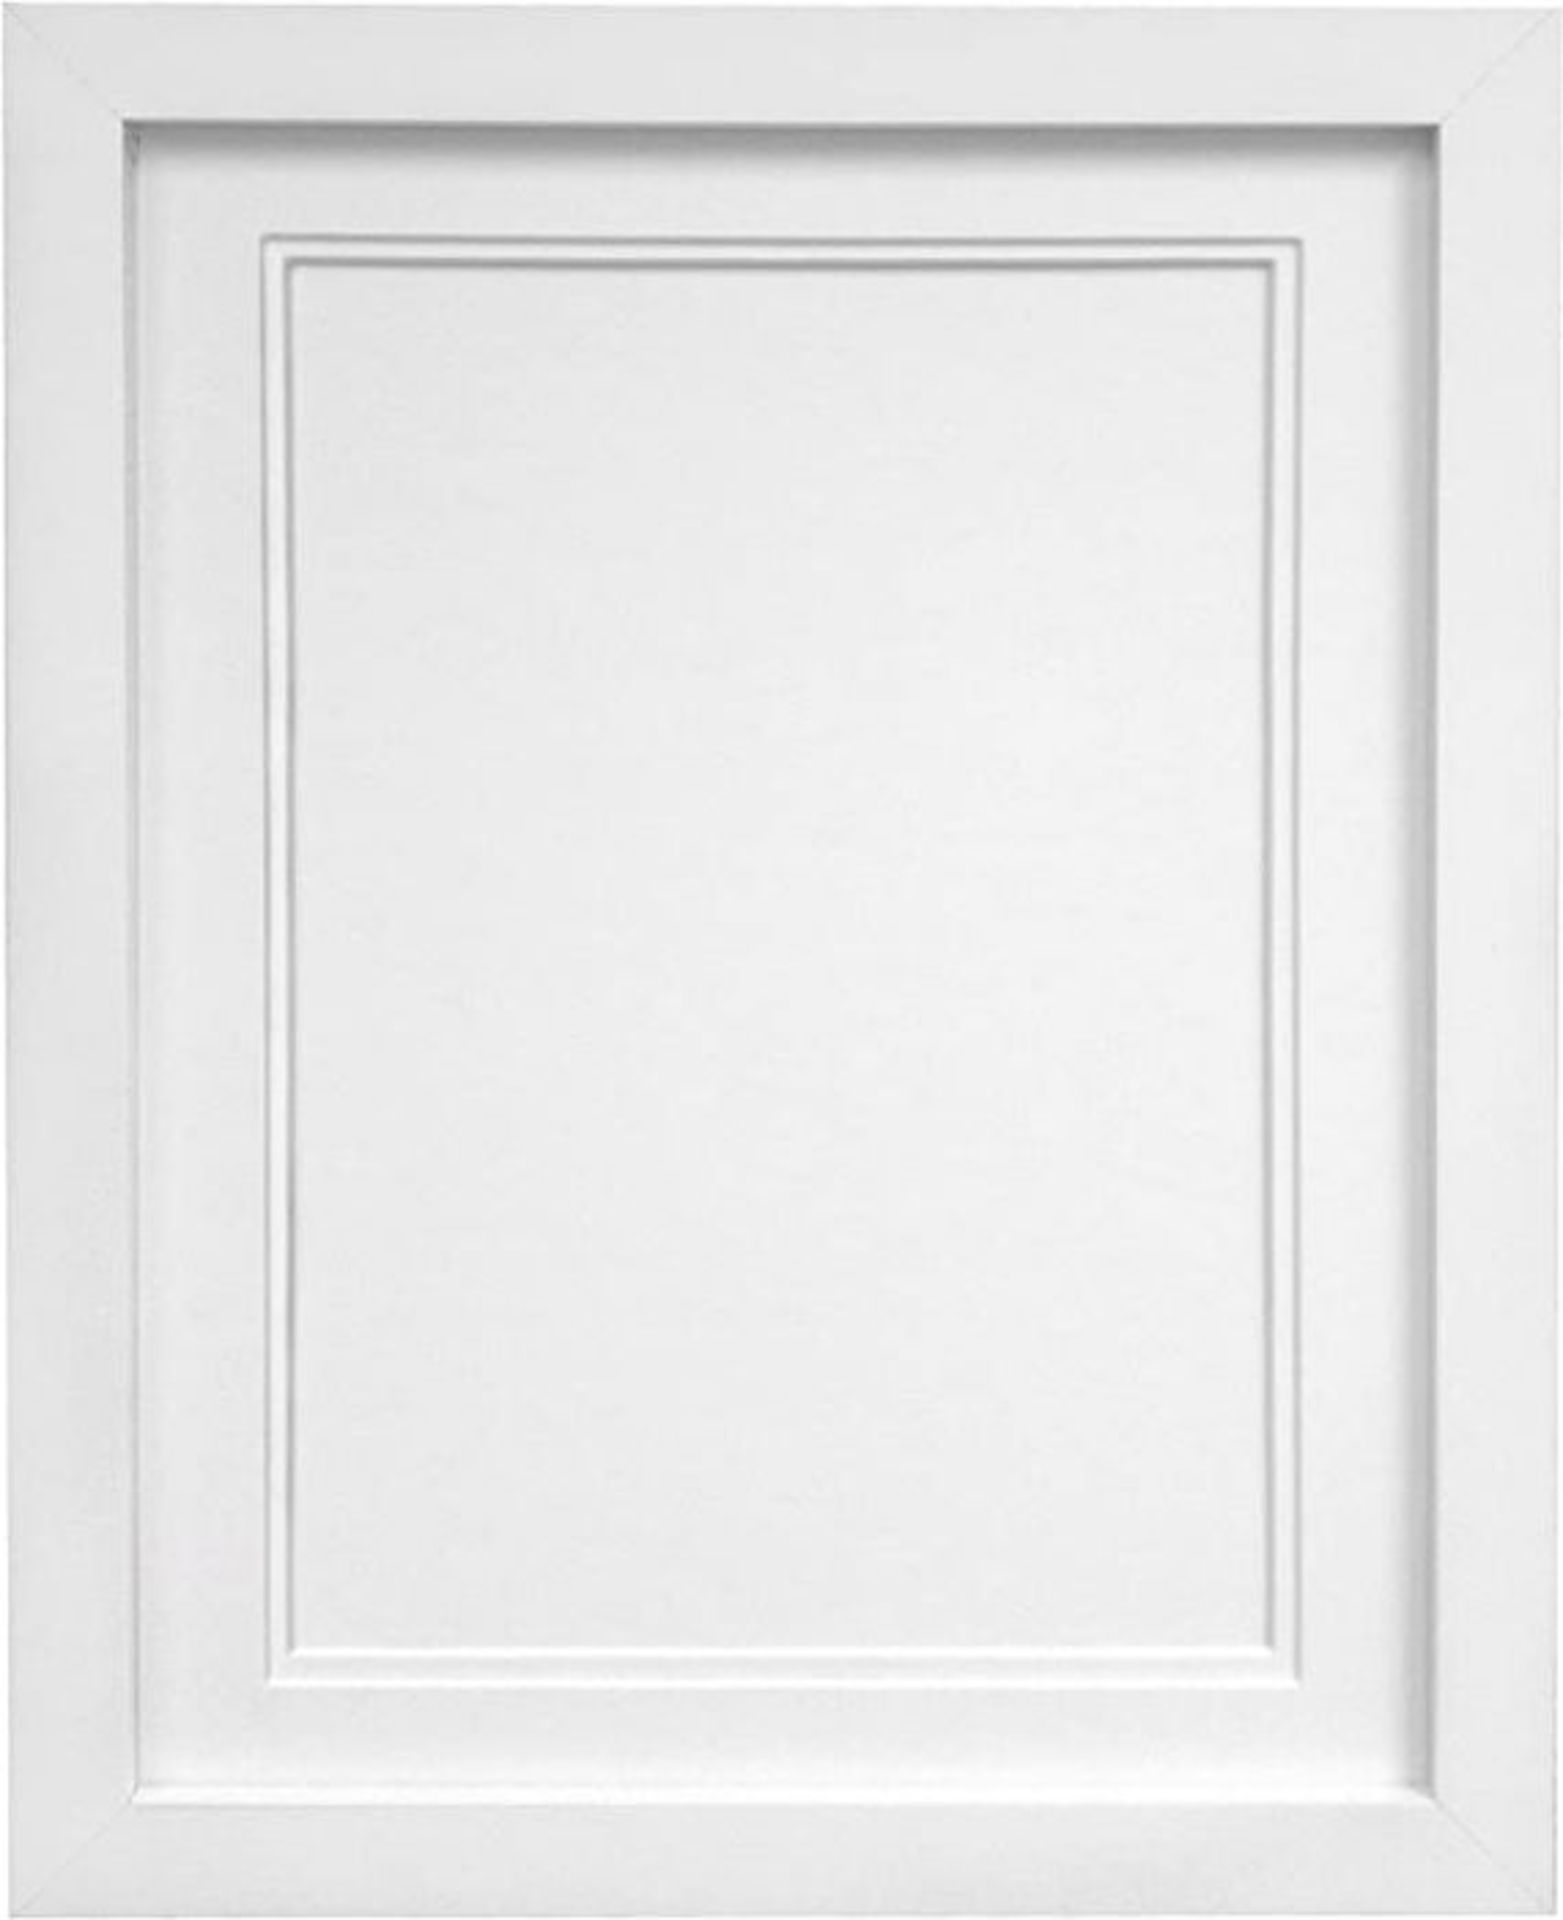 FRAMES BY POST H7 Picture Photo Frame, Wood, White with White Double Mount, A3 Image Size A4 - - Image 2 of 2